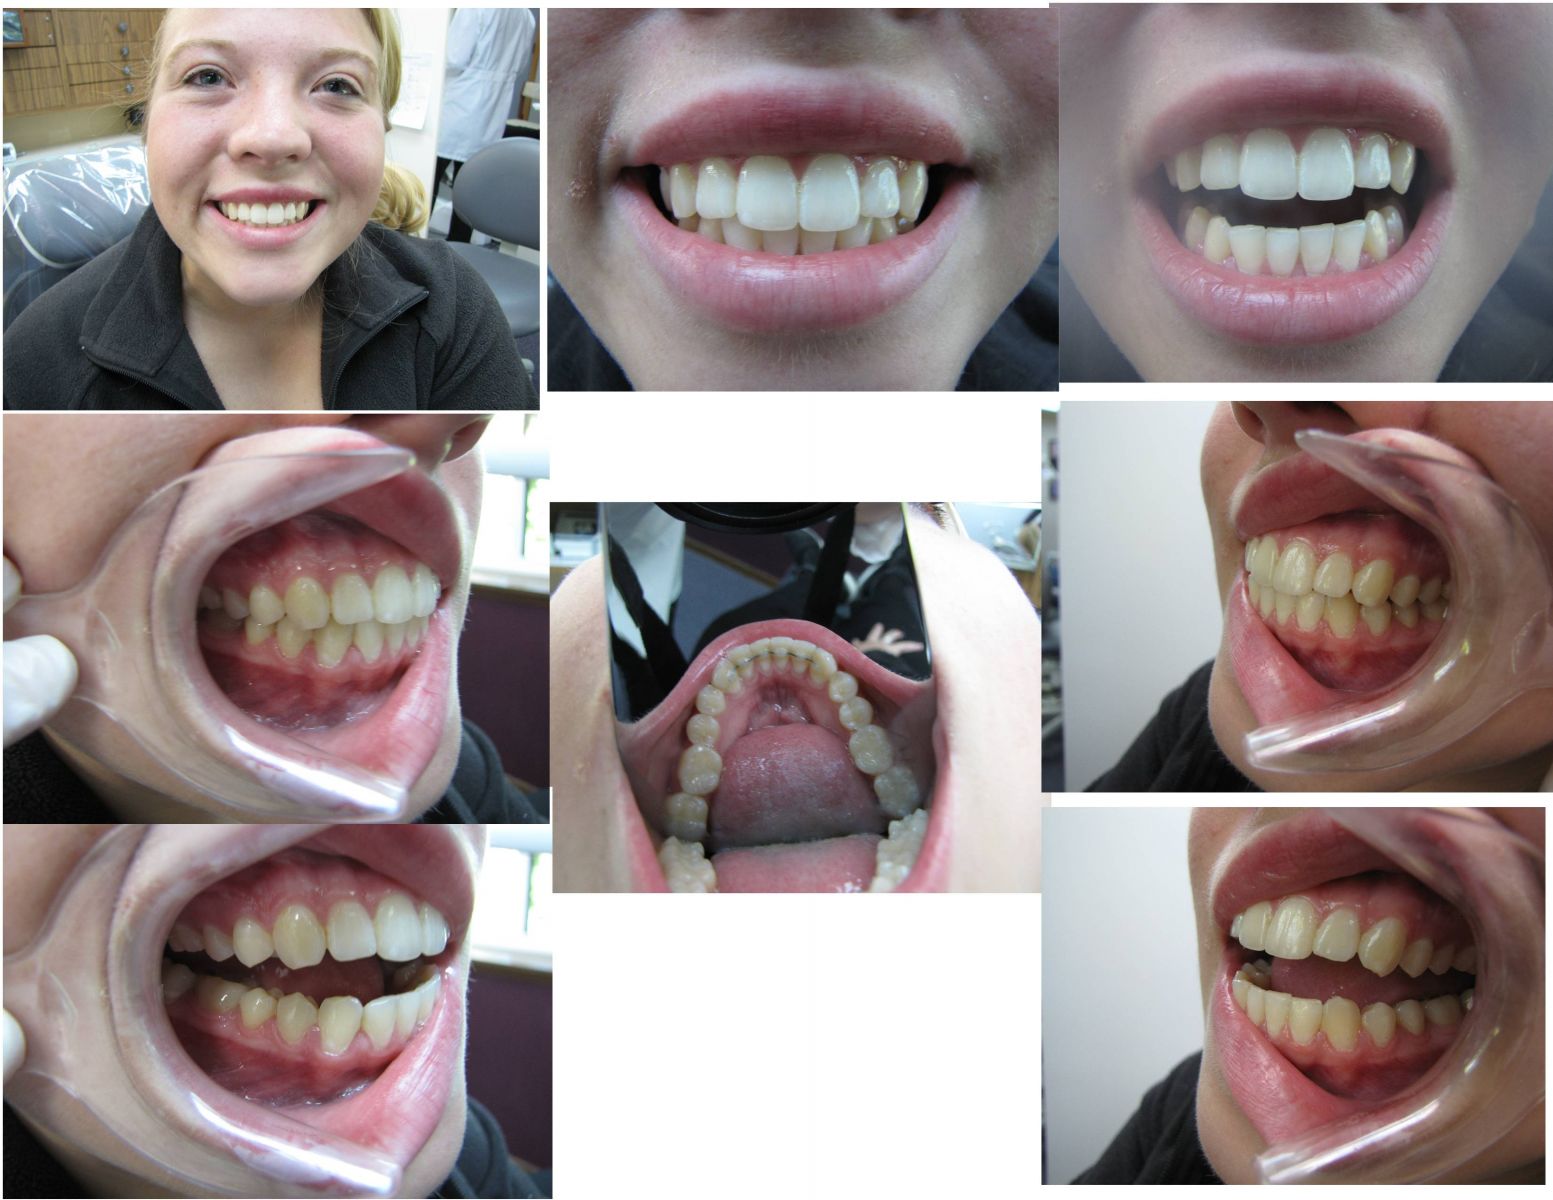 Cosmetic Orthodontics in Port Orchard, WA - After Treatment